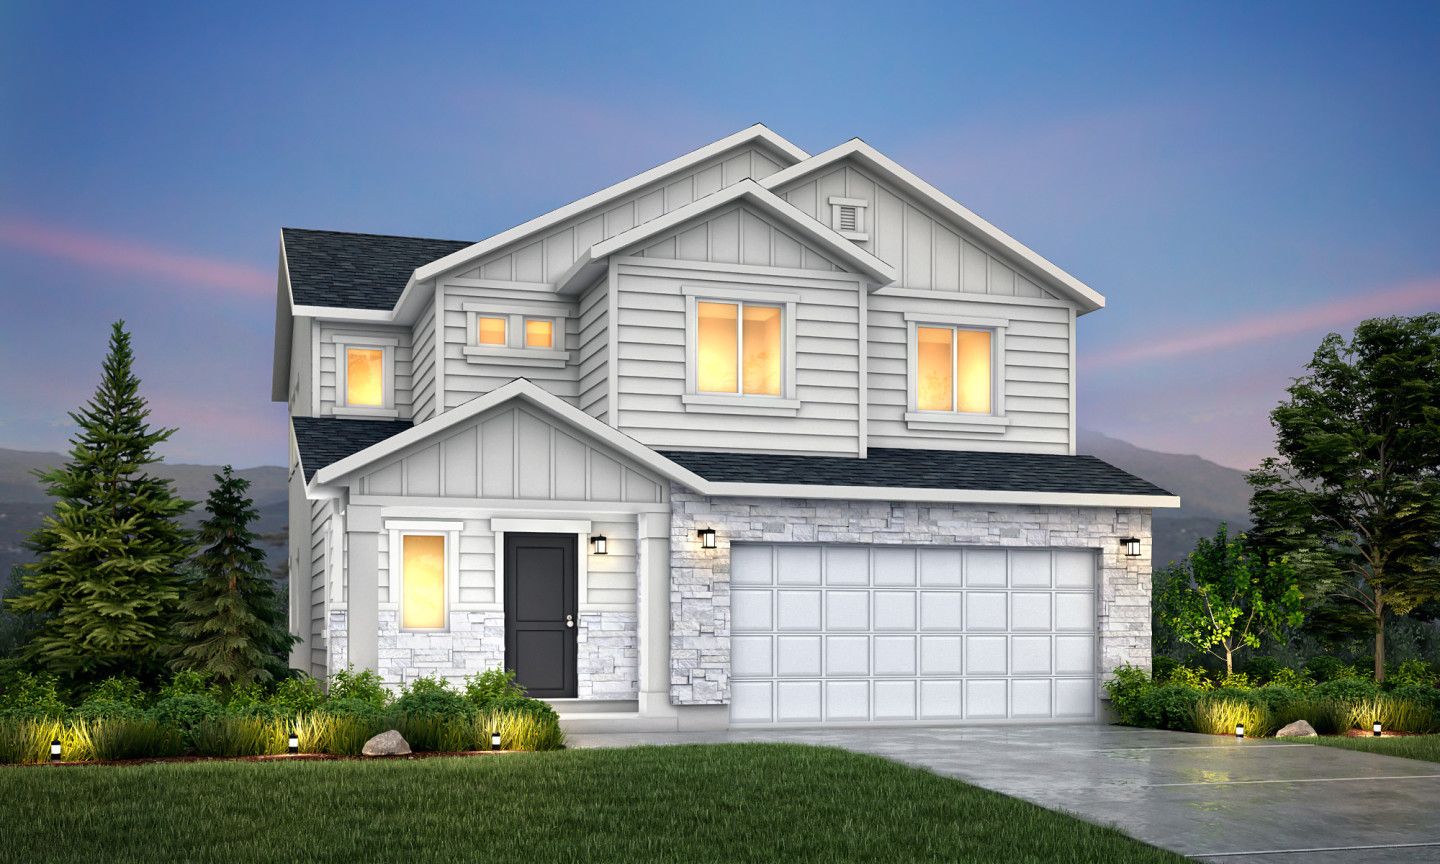 Sycamore - Traditional (Elevation A):Shoreline Bayview